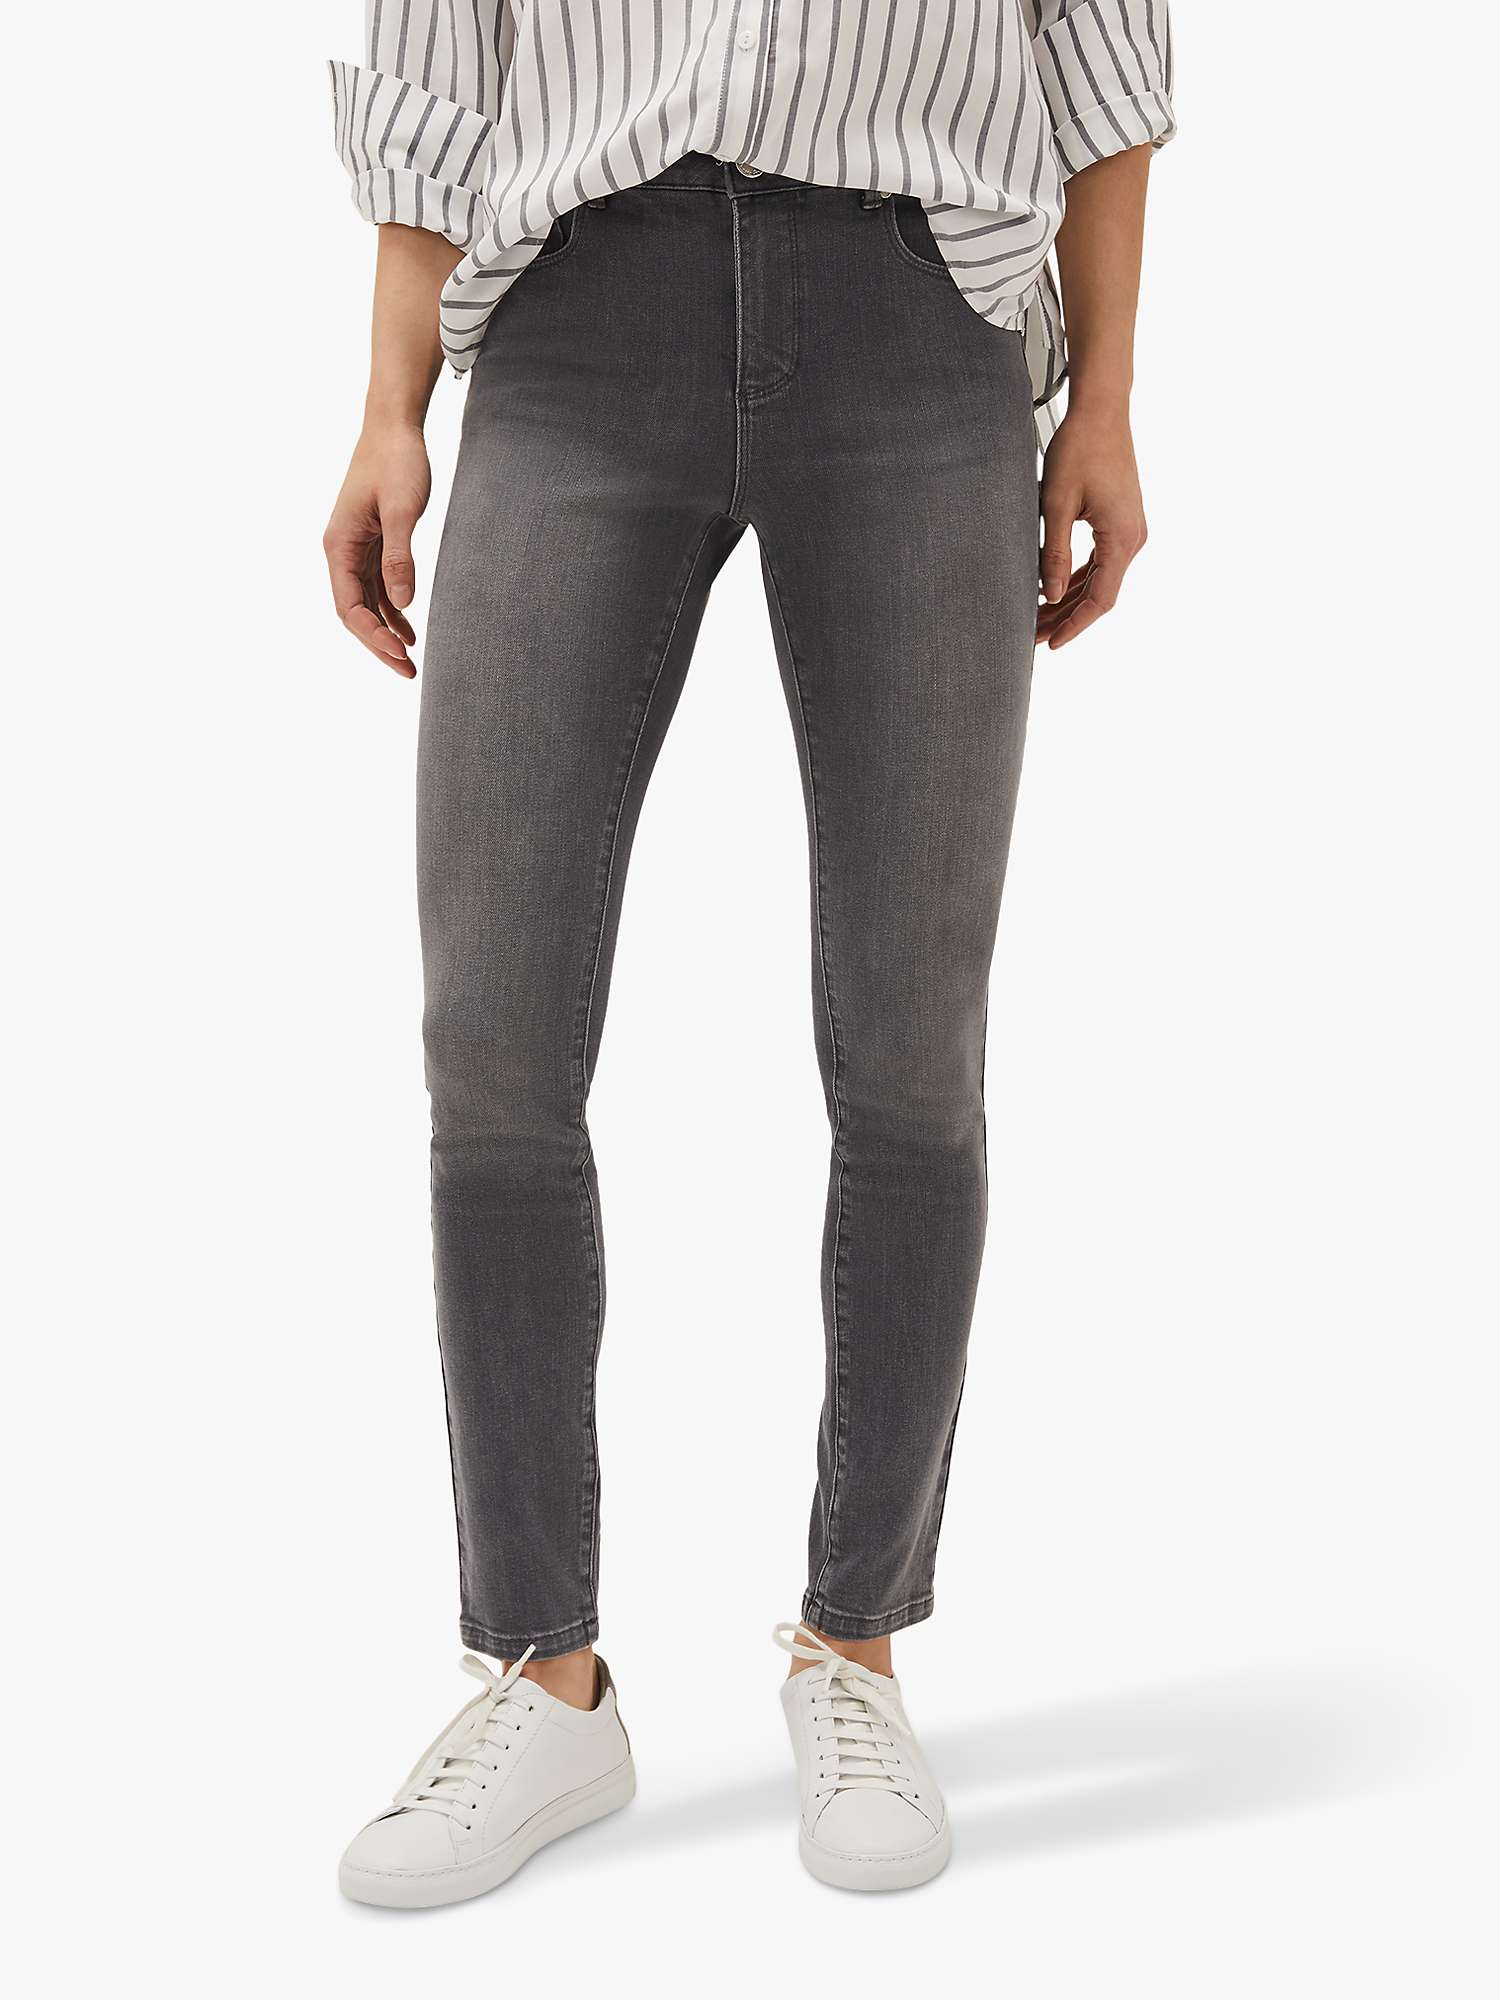 Buy Phase Eight Aida High Waisted Skinny Jeans, Grey Online at johnlewis.com